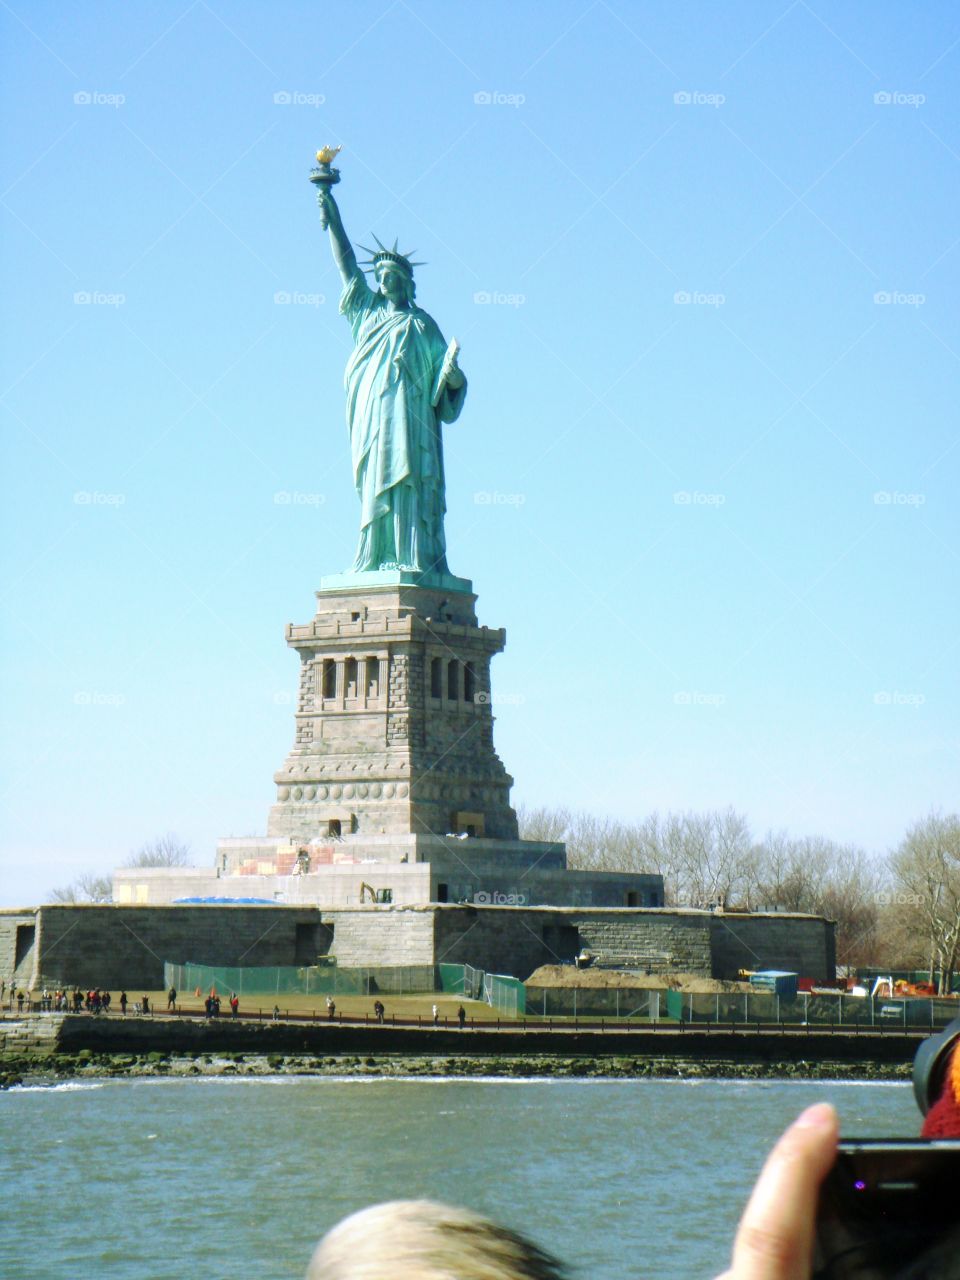 the Statue of Liberty in New York